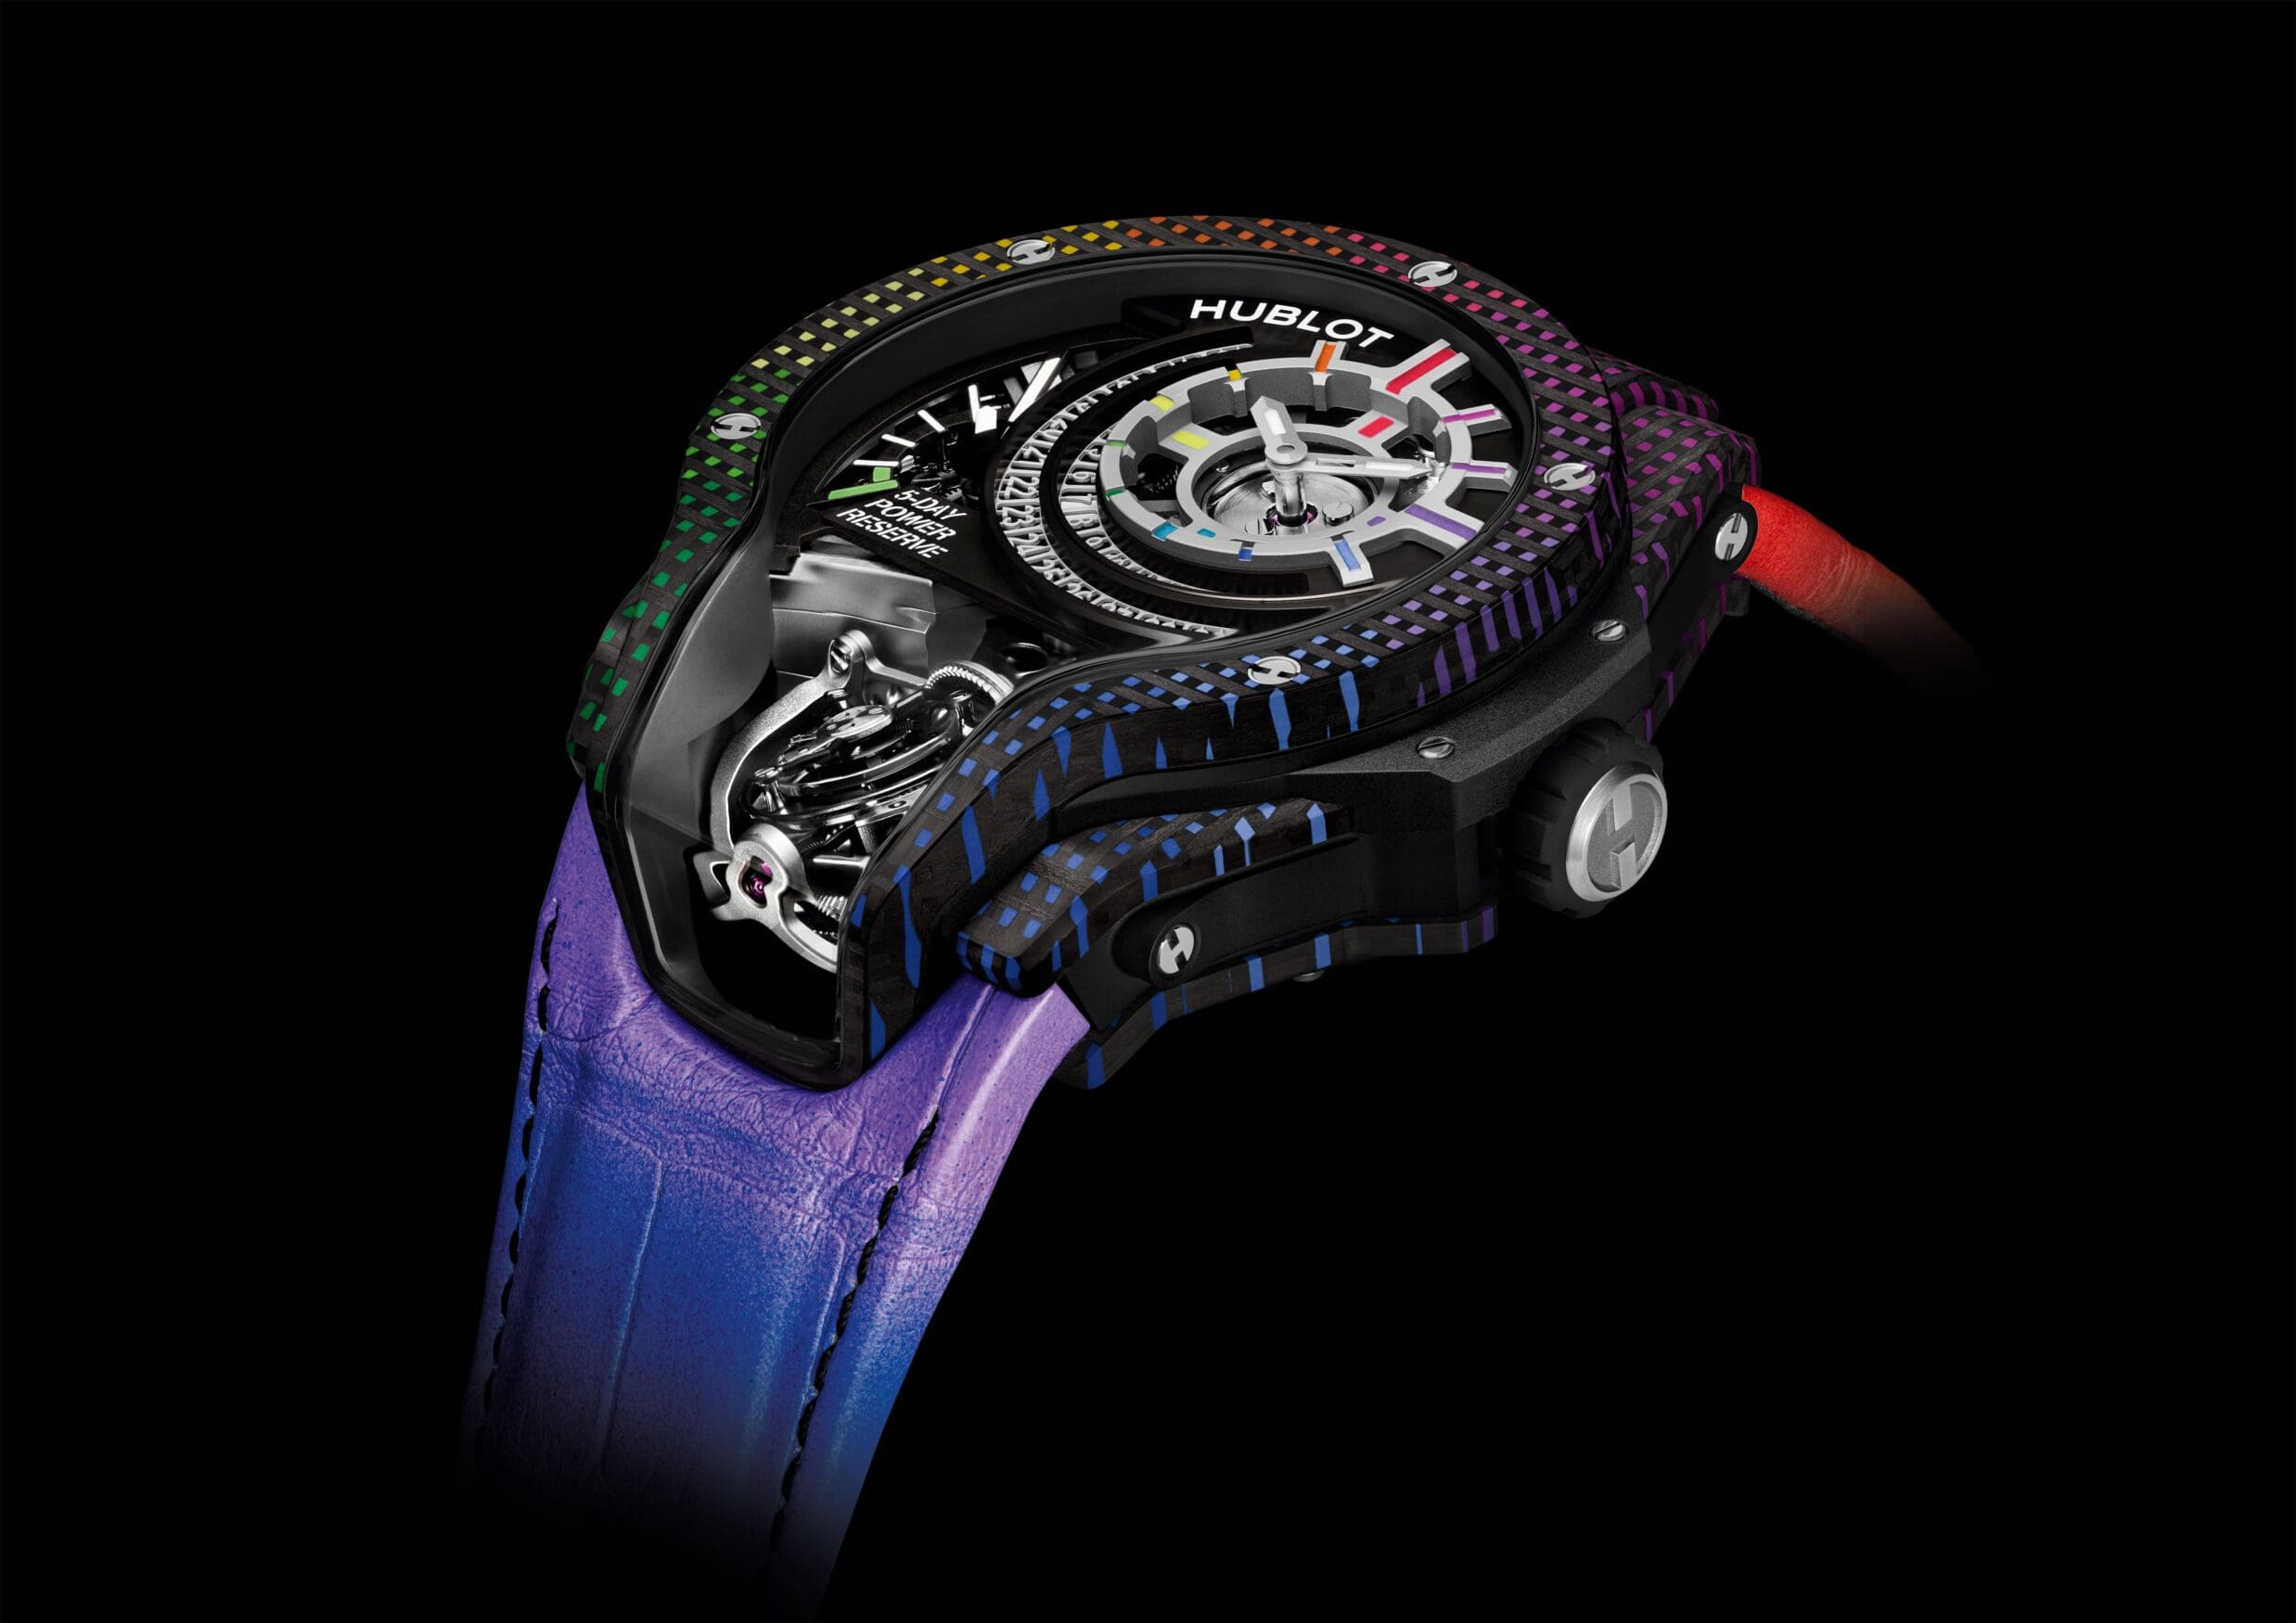 Pushing case design with the Hublot MP-09 Tourbillon Bi-Axis 5-Day Power Reserve